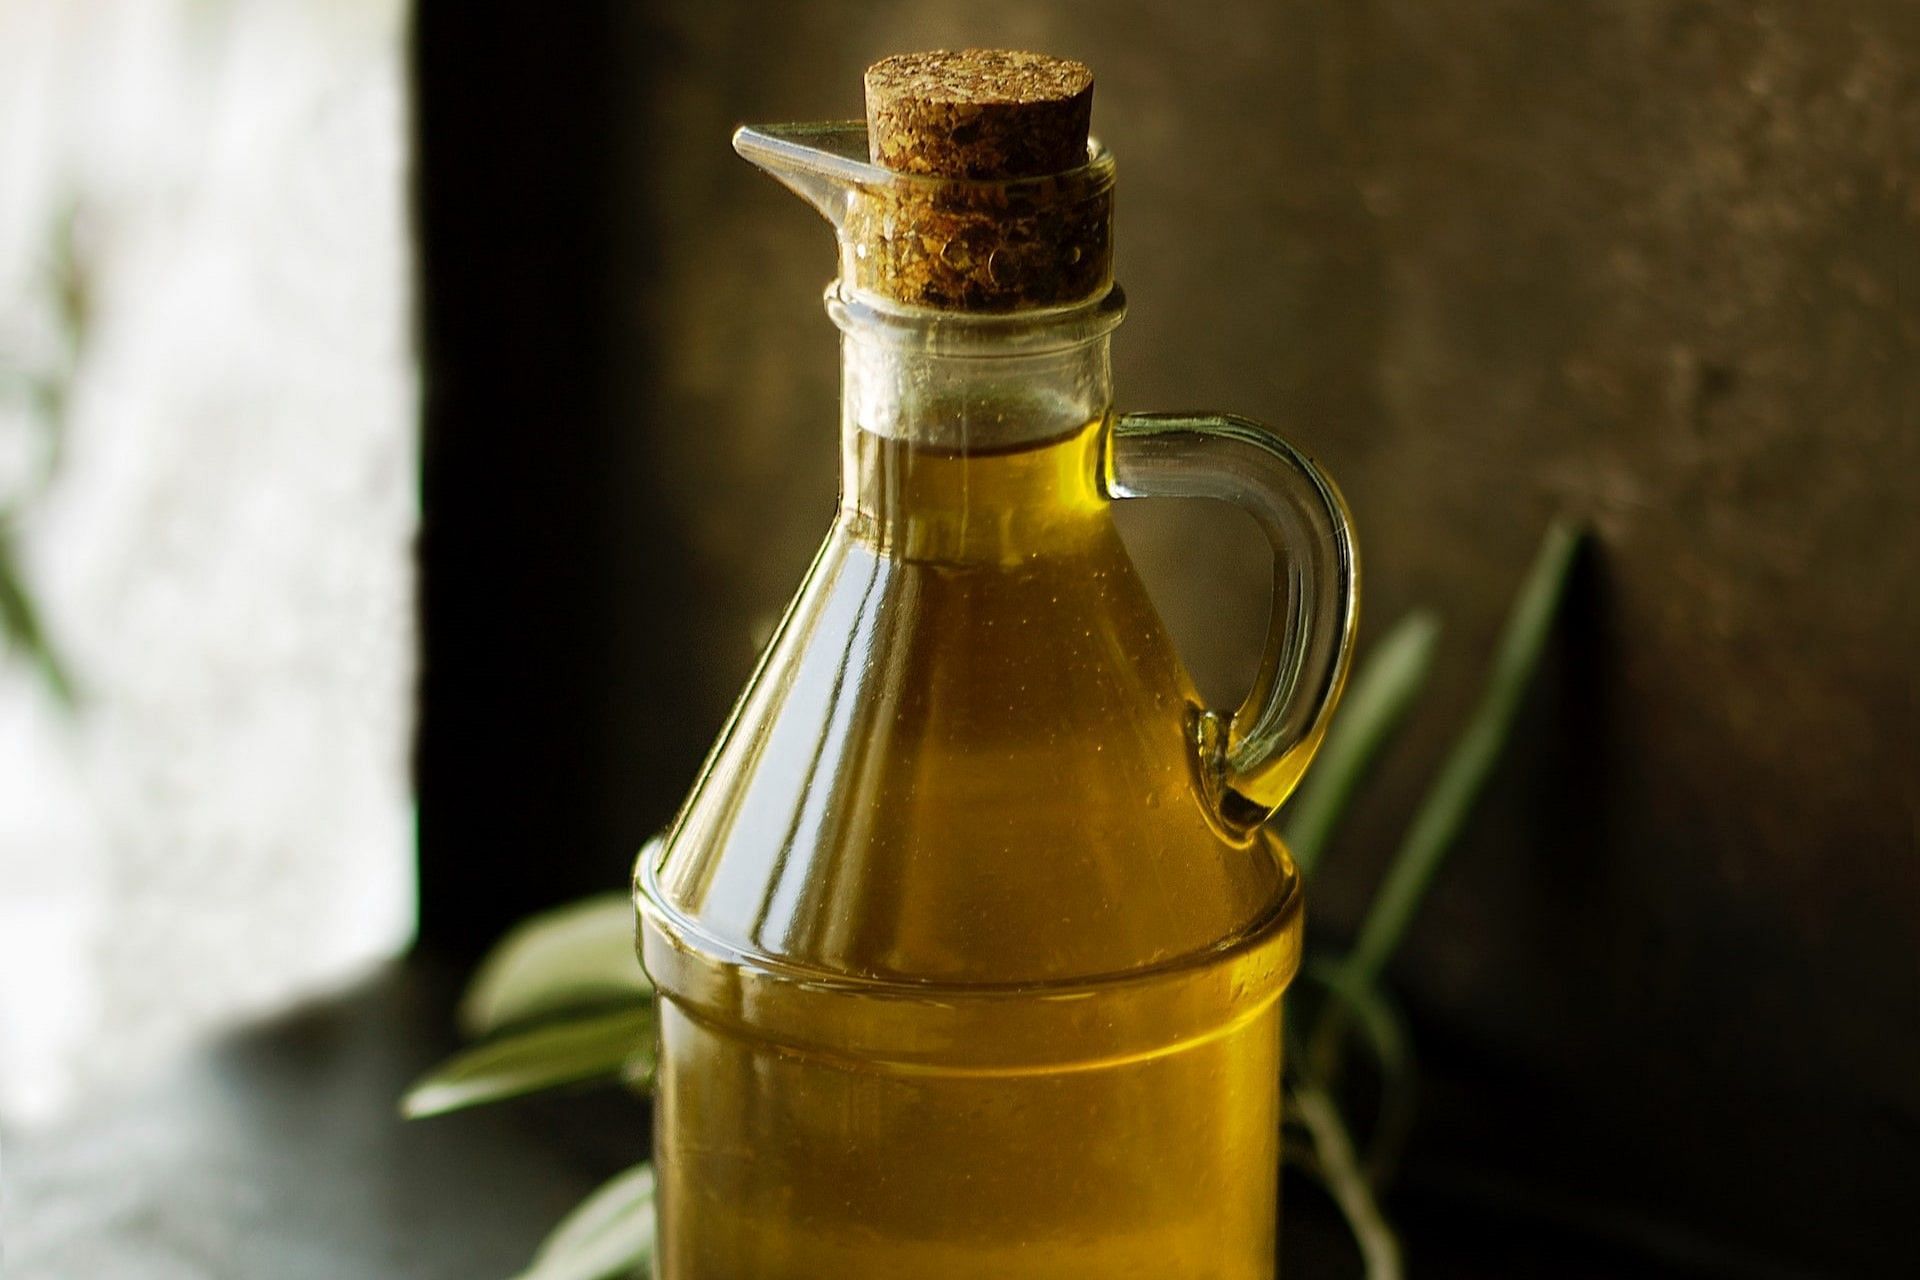 Is canola oil bad for you? (Photo by Roberta Sorge on Unsplash)